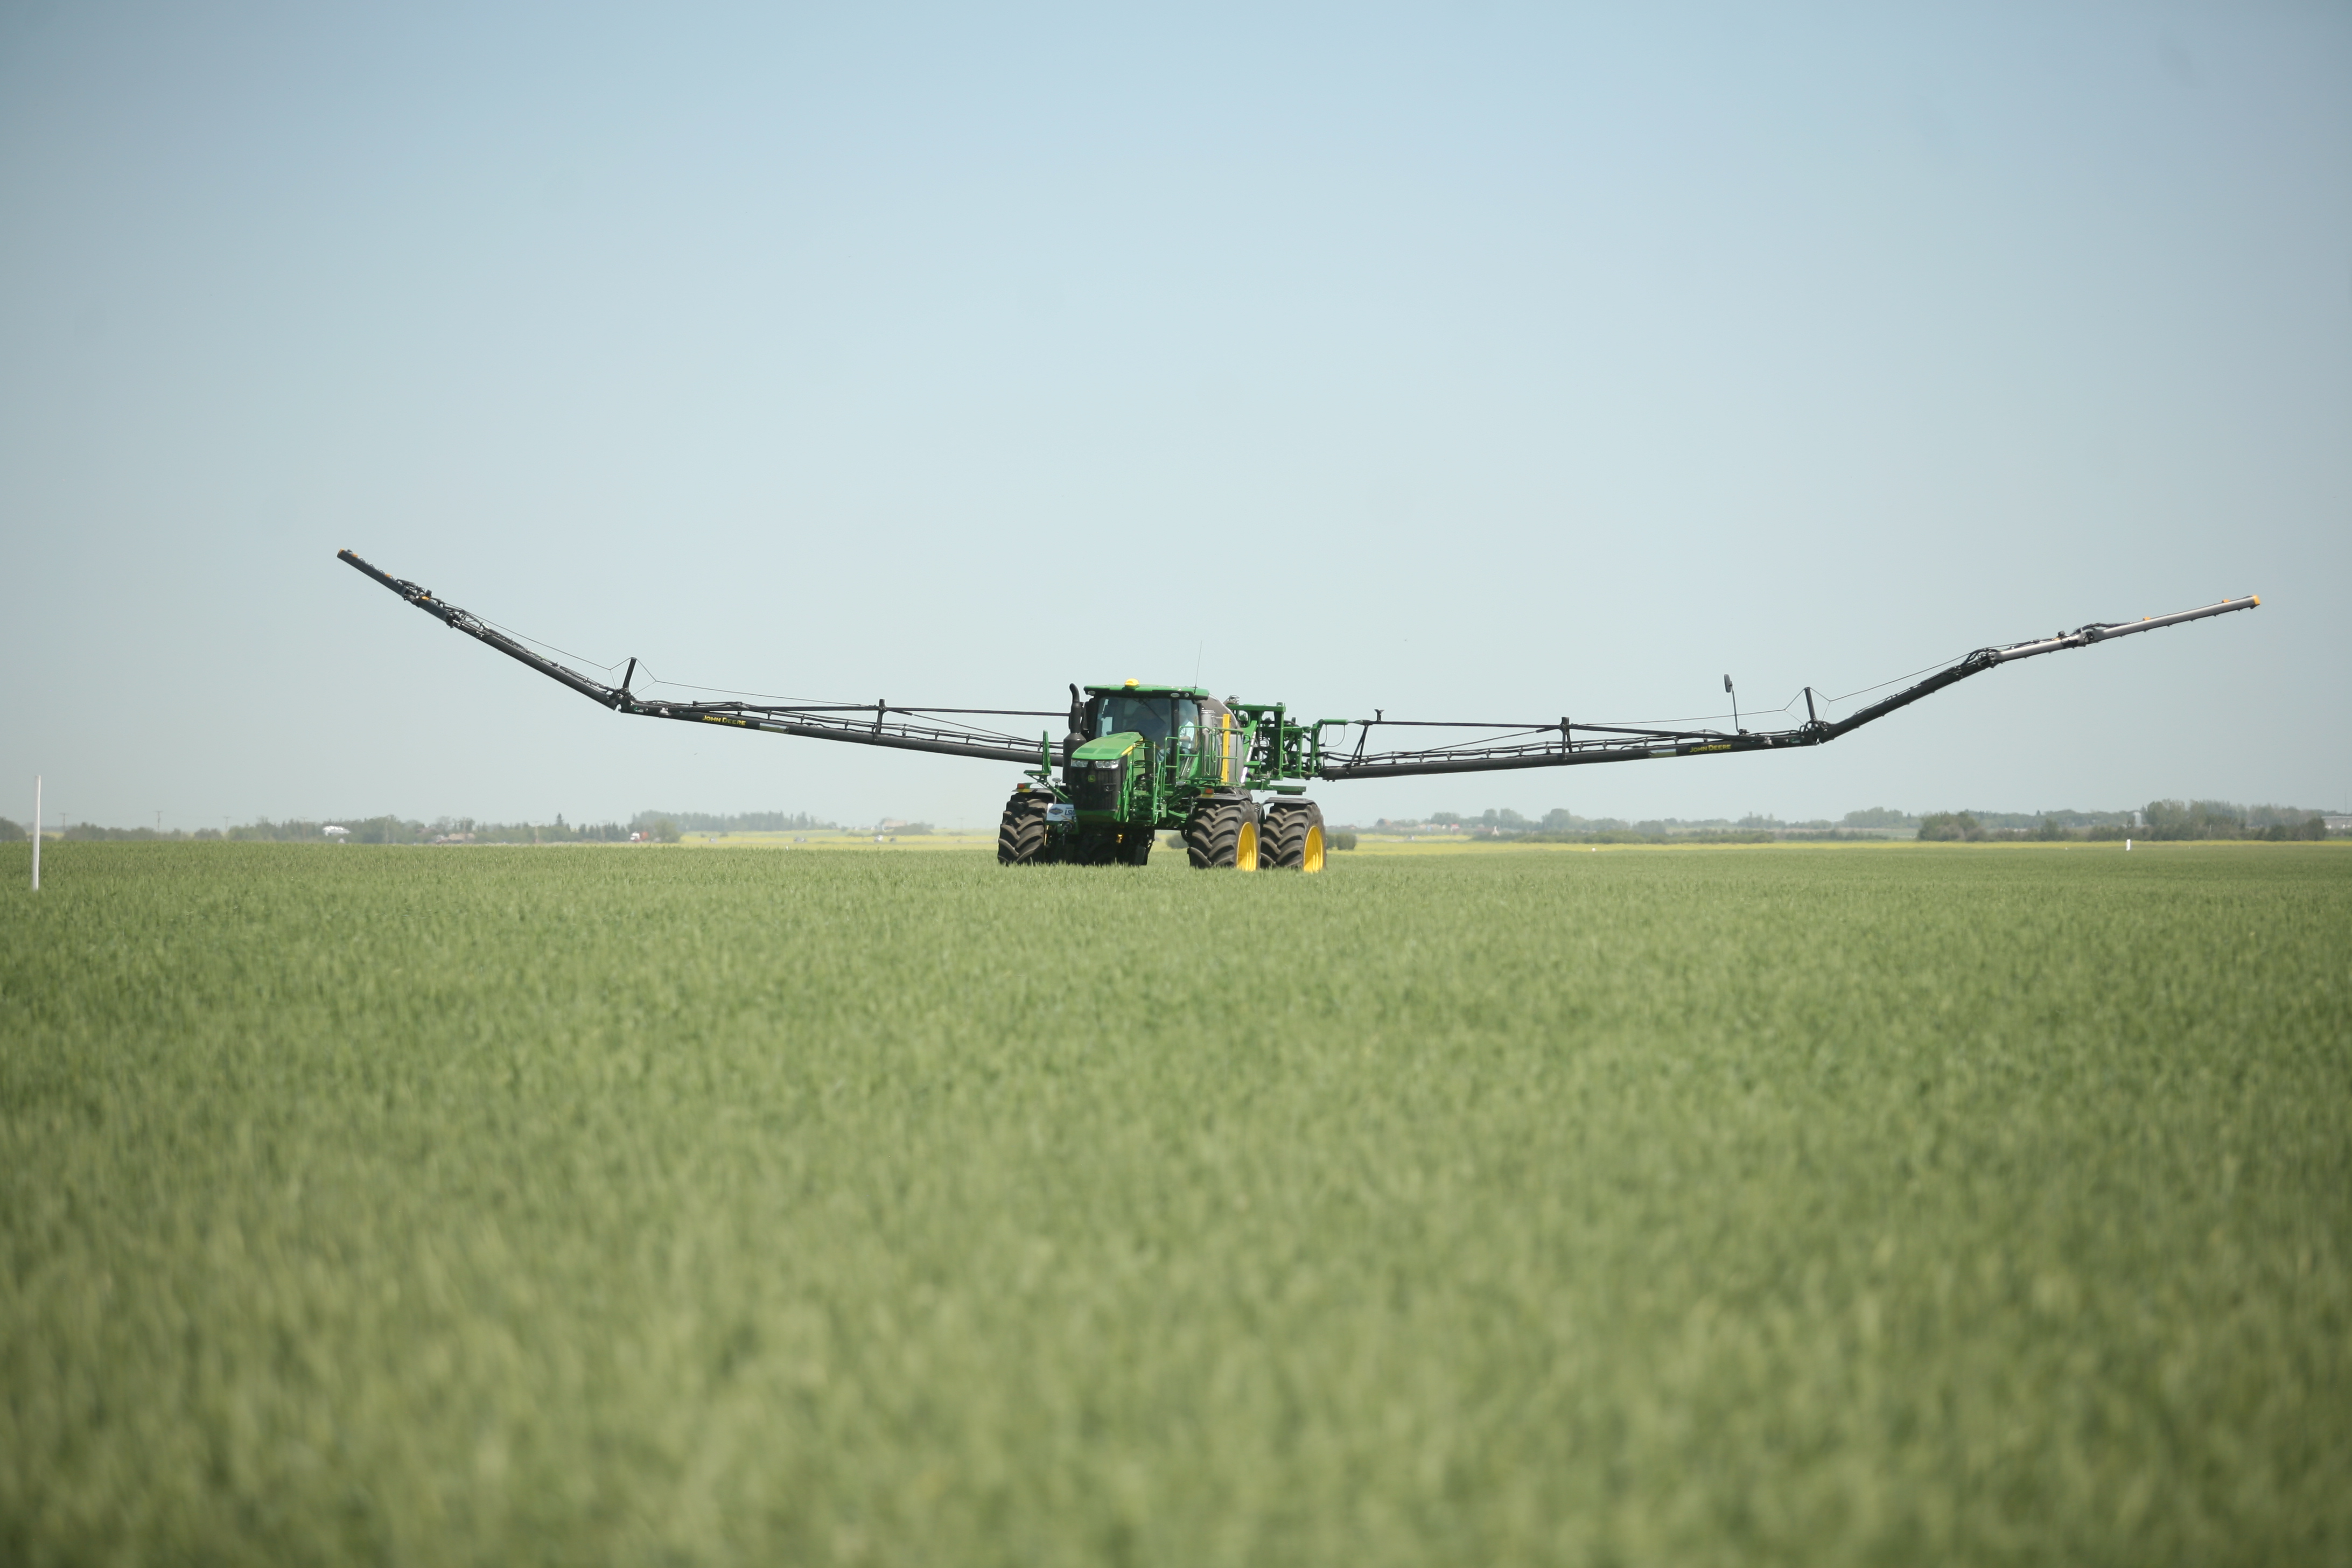 Sprayer Ride & Drive Helps Farmers with Decision Making